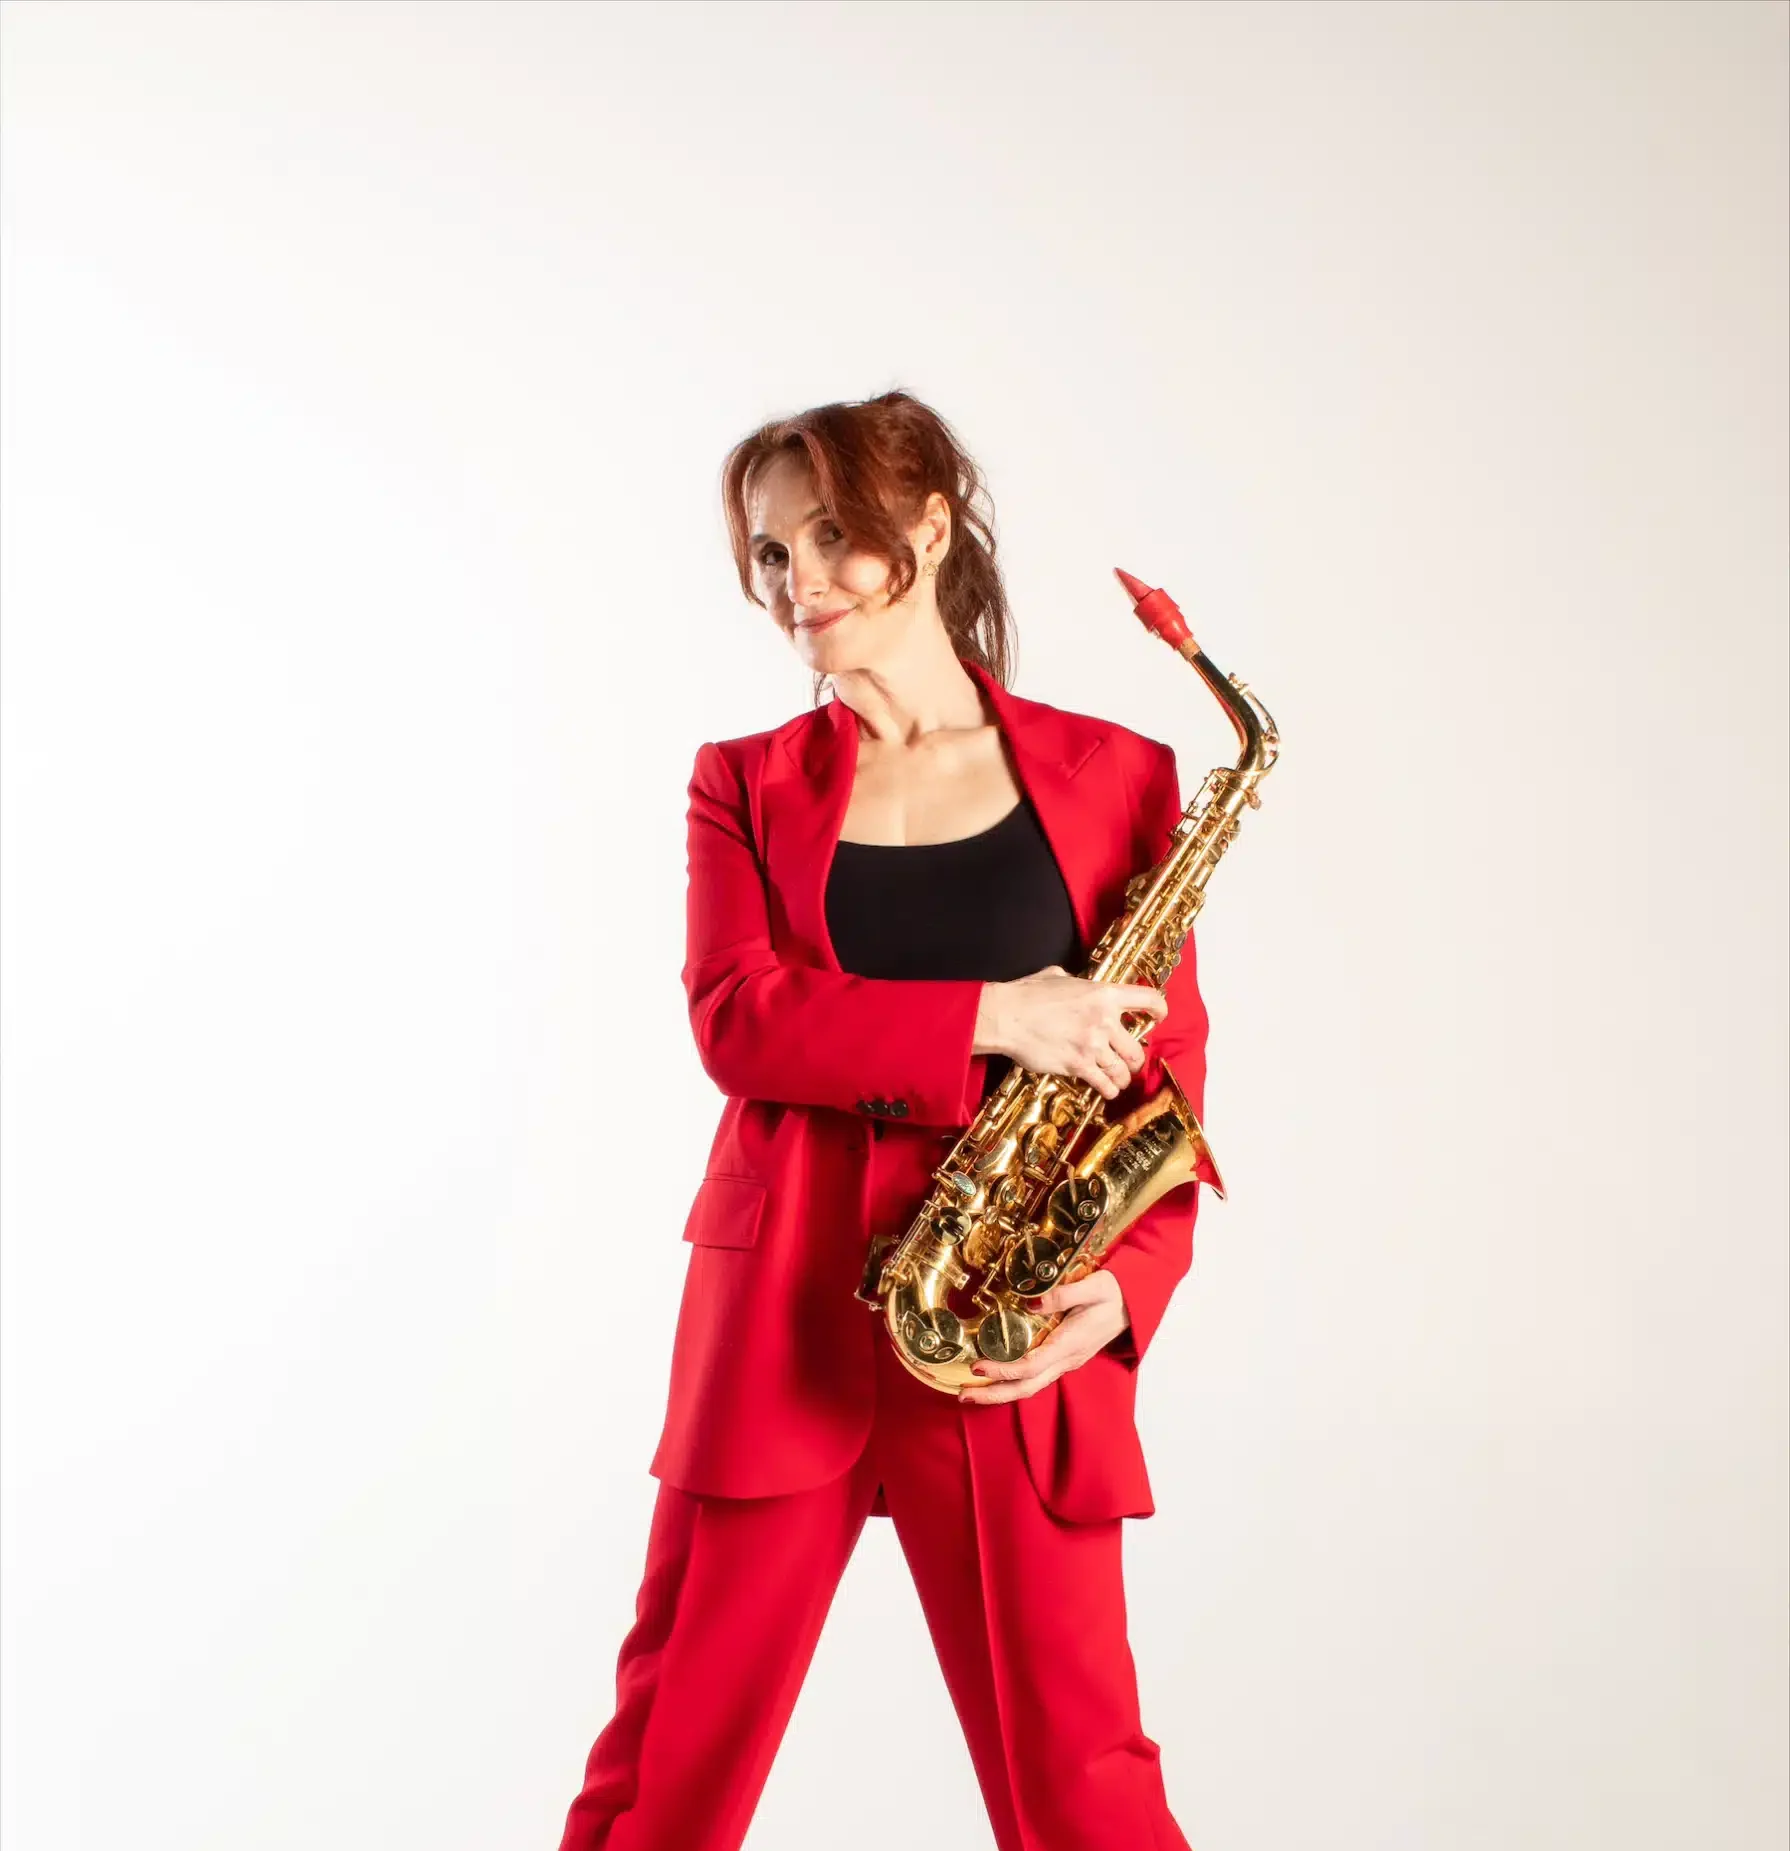 saxophonist in red